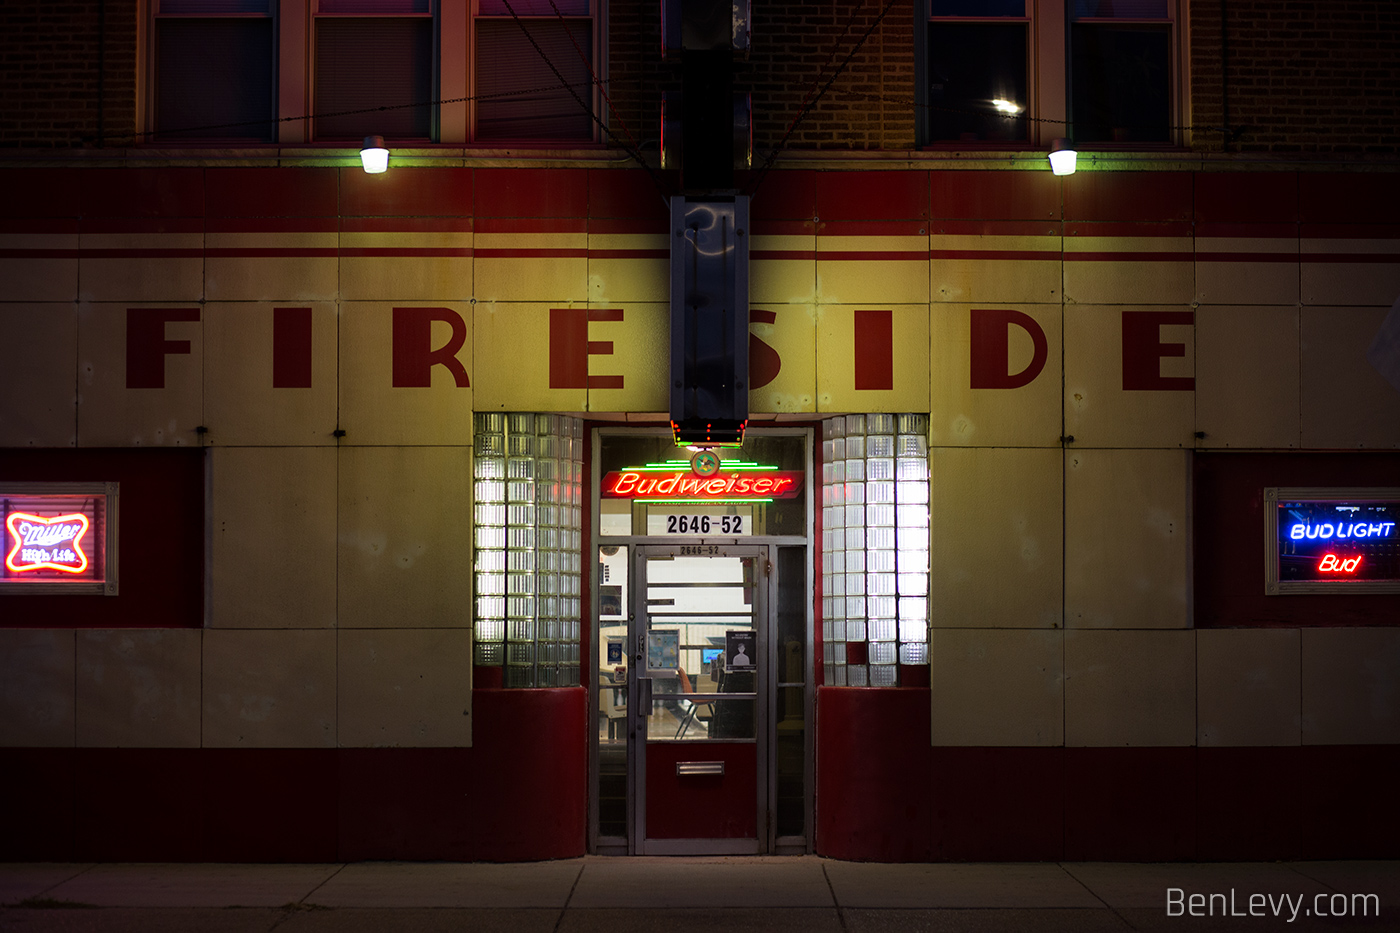 The Entrance to Fireside Bowl